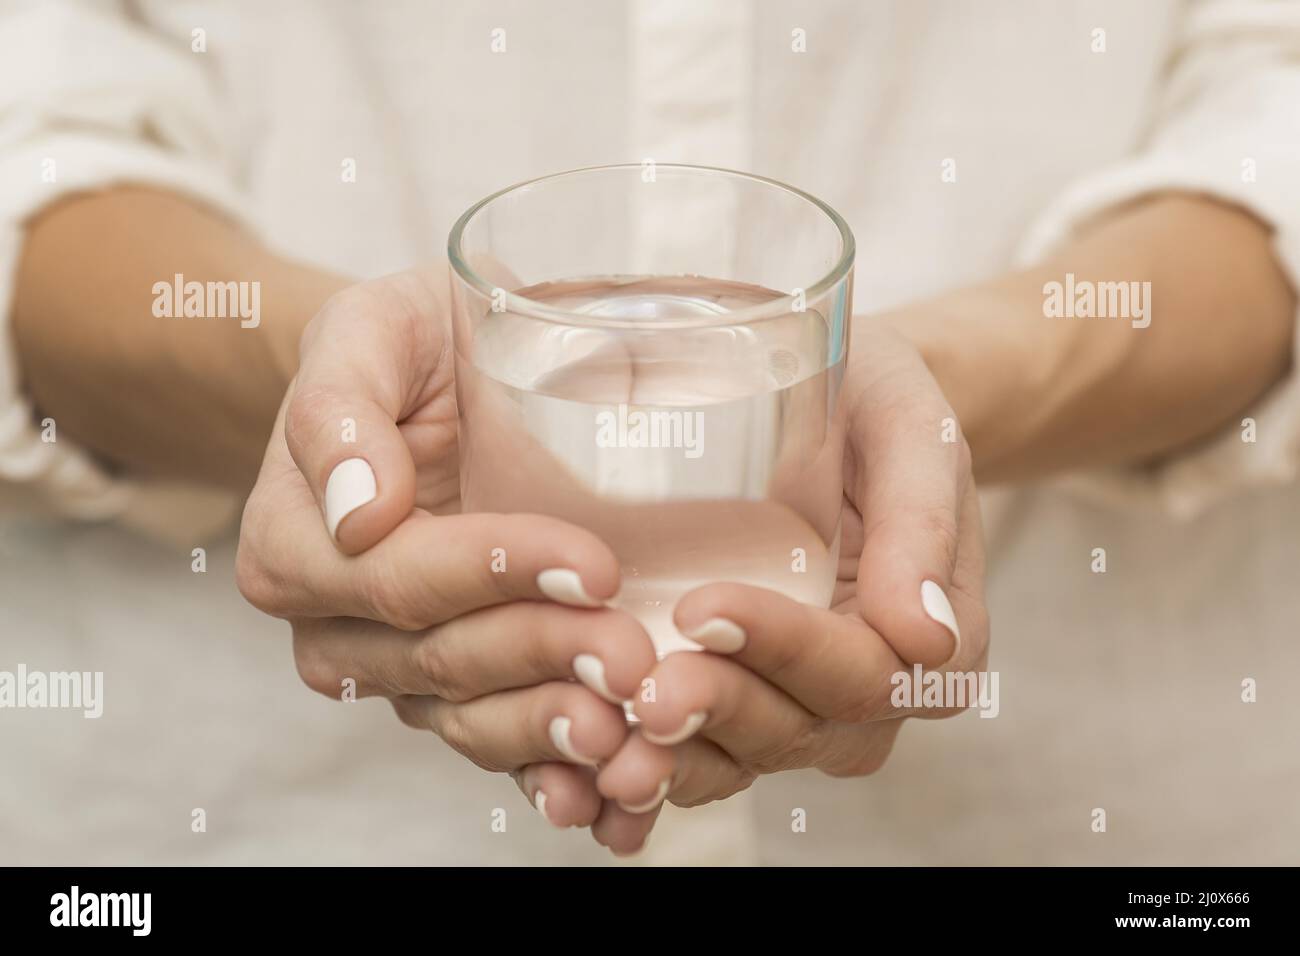 https://c8.alamy.com/comp/2J0X666/woman-holding-glass-filled-with-water-high-quality-beautiful-photo-concept-2J0X666.jpg